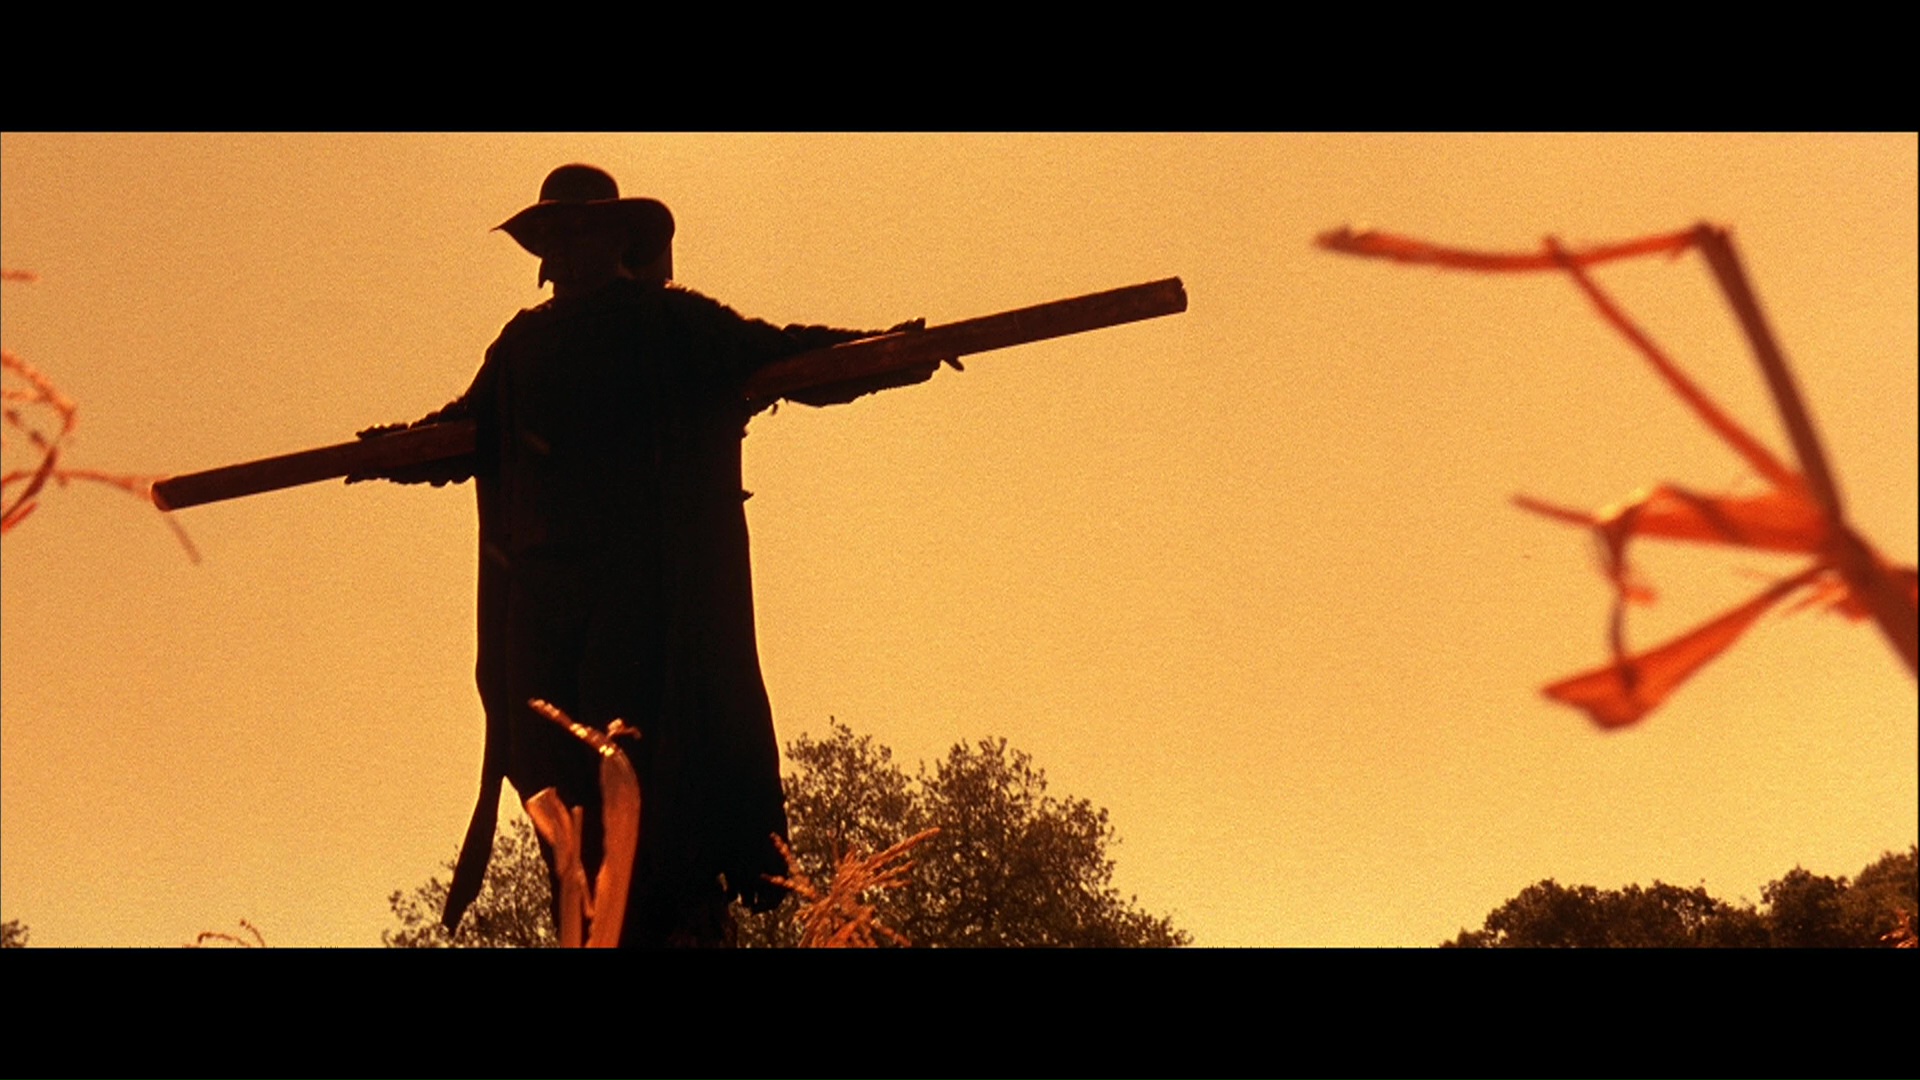 Jeepers Creepers 2.